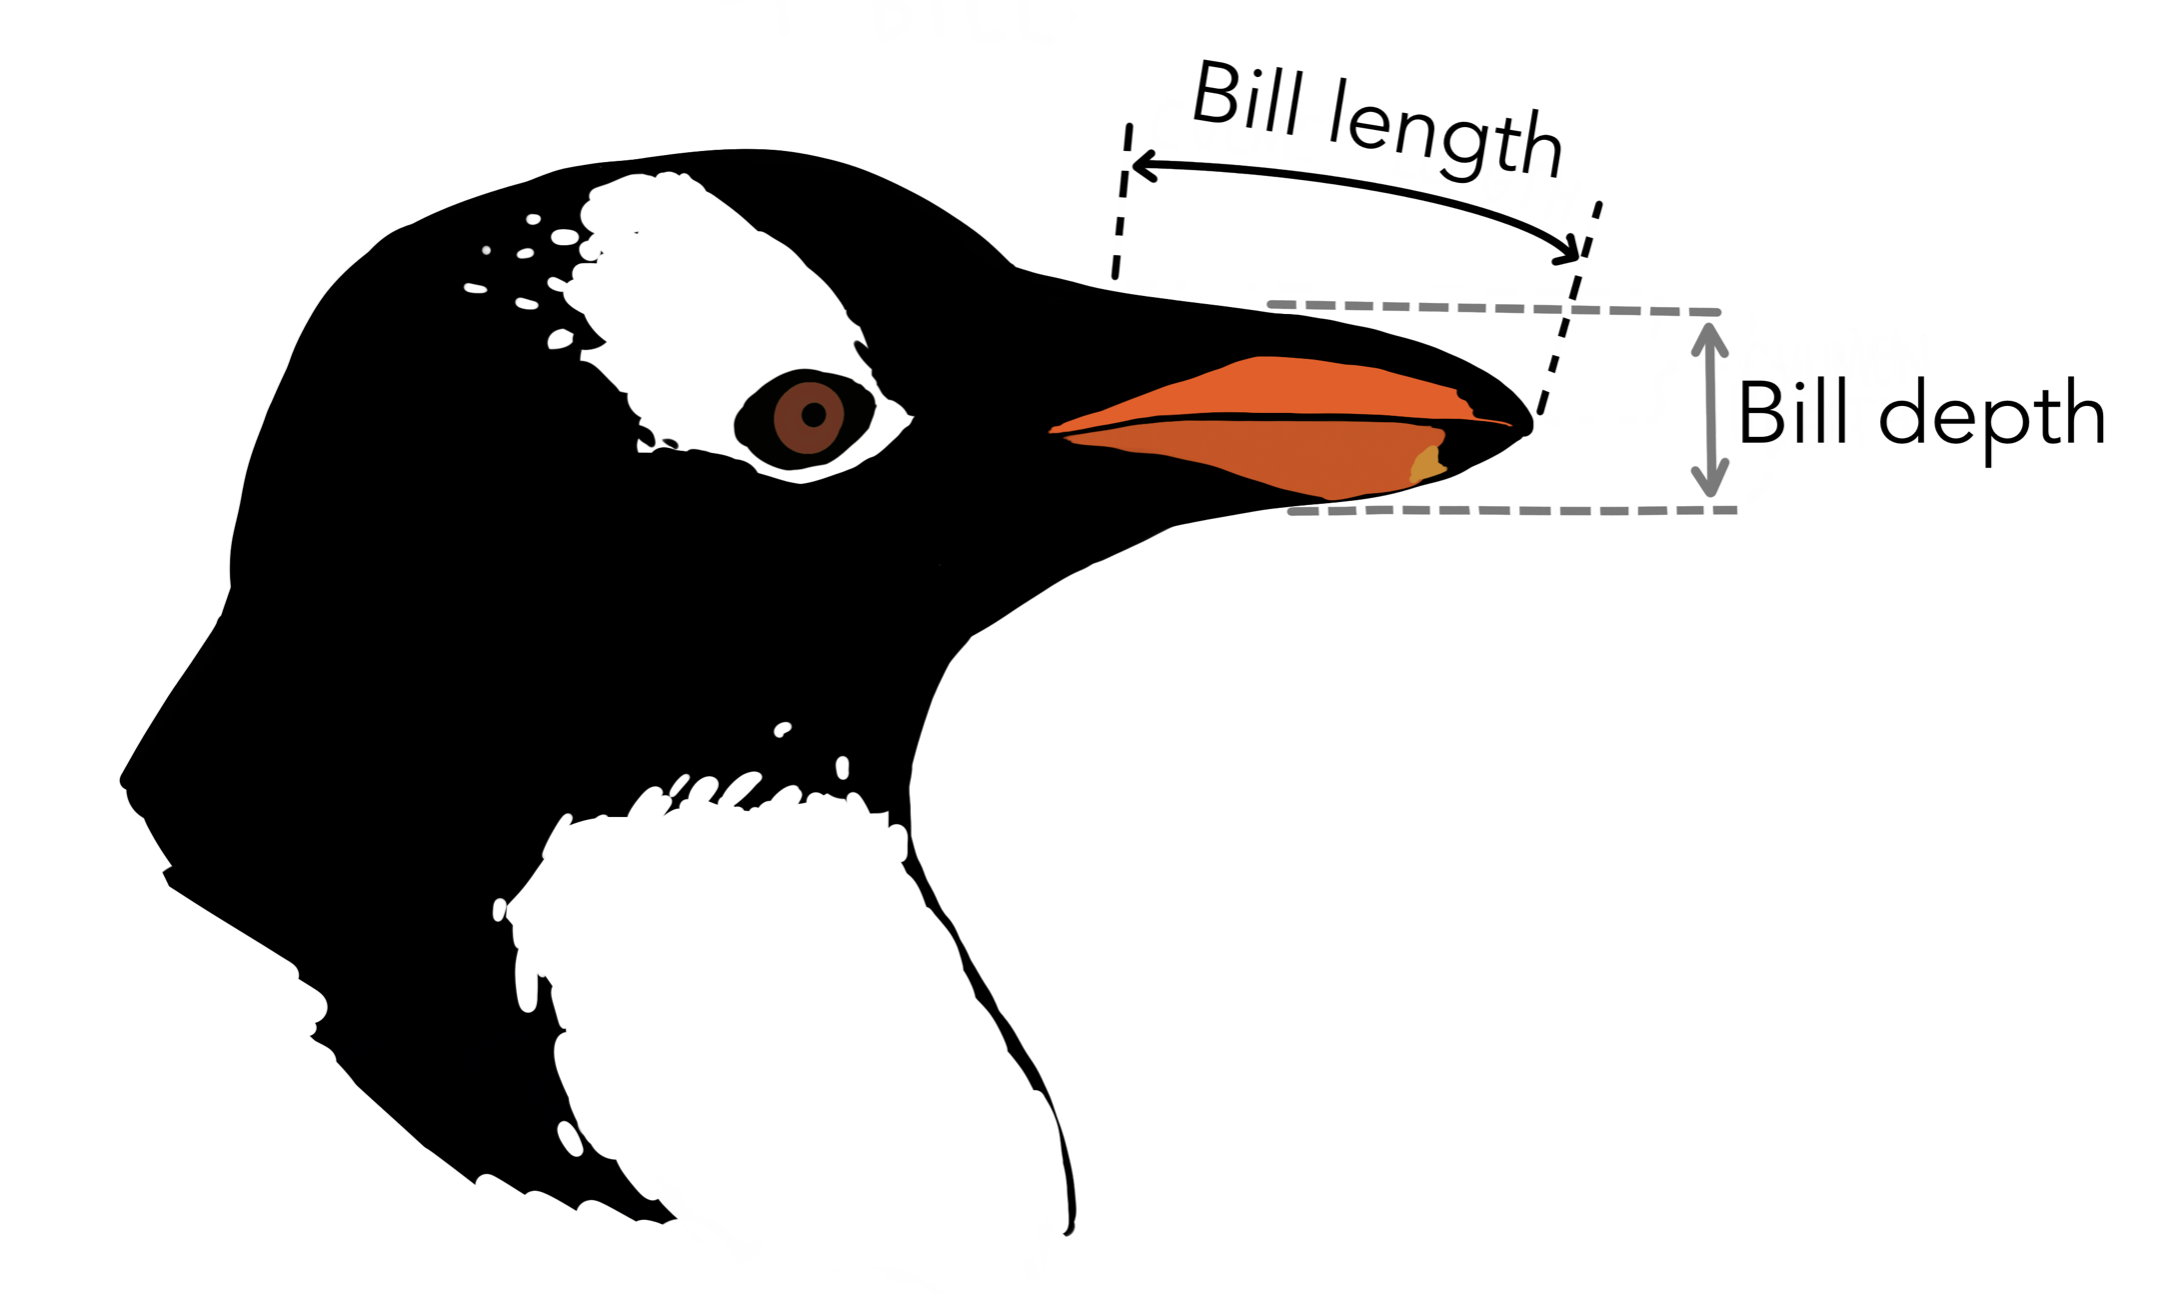 A sketch of the a penguin in profile, with a measuring bar indicating a measurement of the bill length.